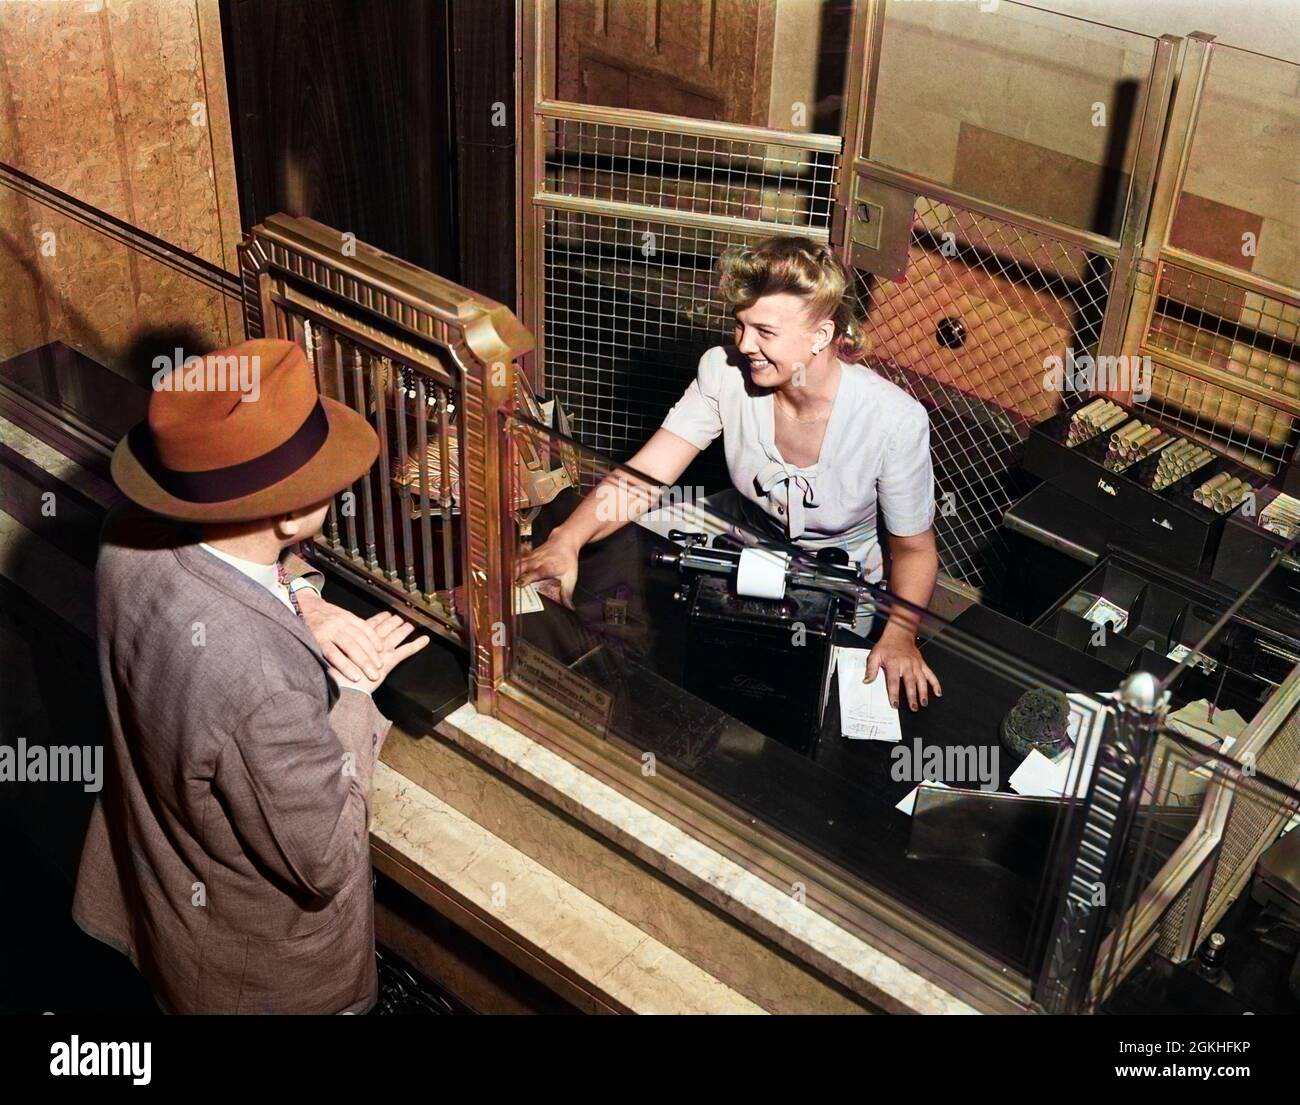 1940s SMILING WOMAN BANK TELLER BEHIND CAGE SERVING MALE CUSTOMER - q44258c CPC001 HARS SERVE BILL PLEASED JOY CLERK FEMALES CURRENCY CHANGE LADIES PERSONS BANKING MALES CLIENT CAGE OCCUPATION SAVE PAYCHECK HEAD AND SHOULDERS CHEERFUL HIGH ANGLE CUSTOMER SERVICE PAY WORKFORCE LABOR OCCUPATIONS PAYMENT SMILES JOYFUL MID-ADULT WOMAN CAUCASIAN ETHNICITY OLD FASHIONED Stock Photo